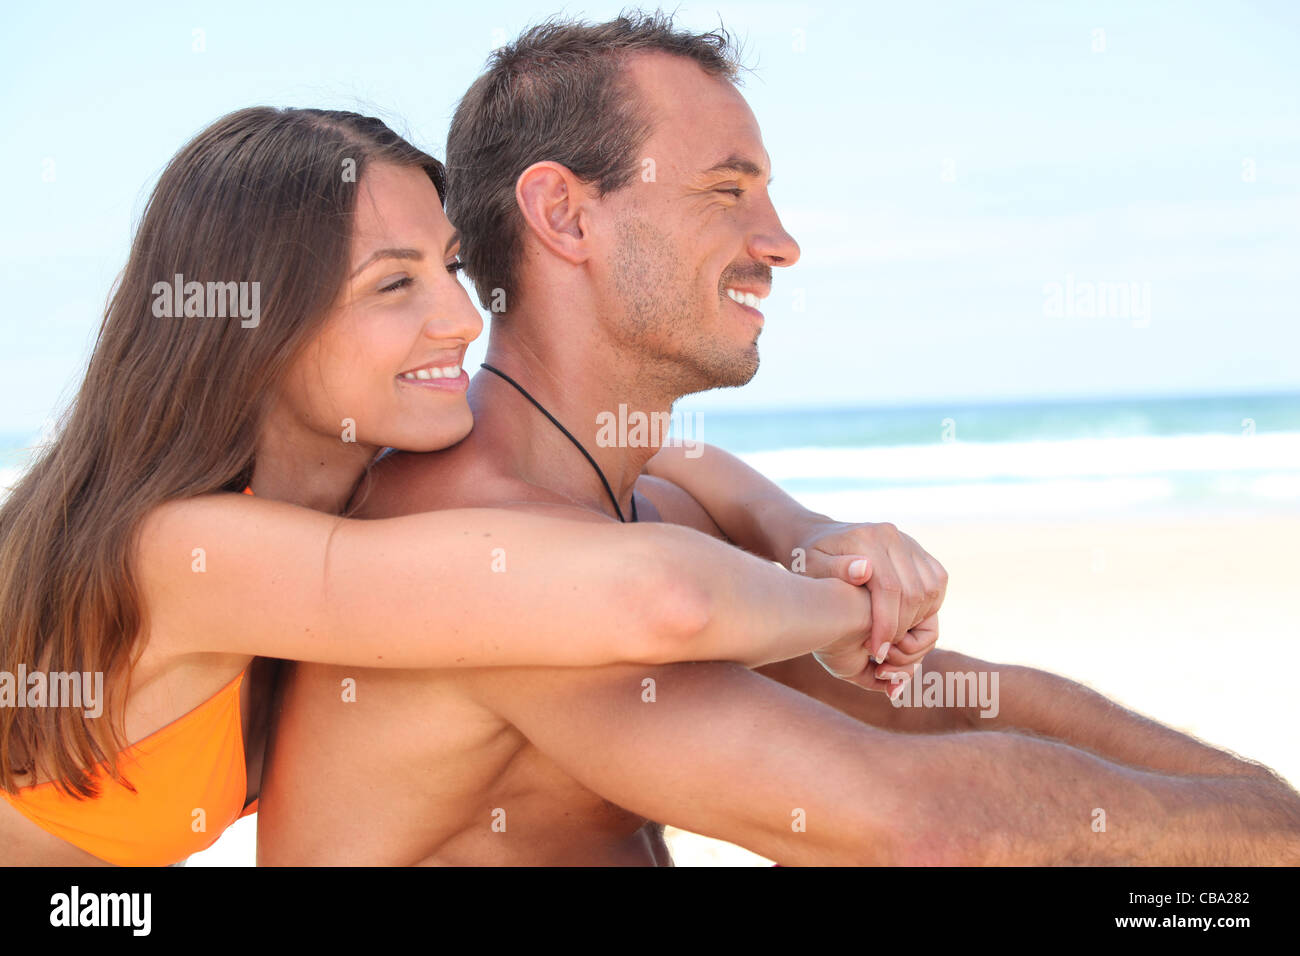 Attractive Couple Playing At The Sea. Girl Flirts With Her Boyfriend: She  Took His Swimming Trunks And Runs Away From Him Stock Photo, Picture and  Royalty Free Image. Image 93837530.